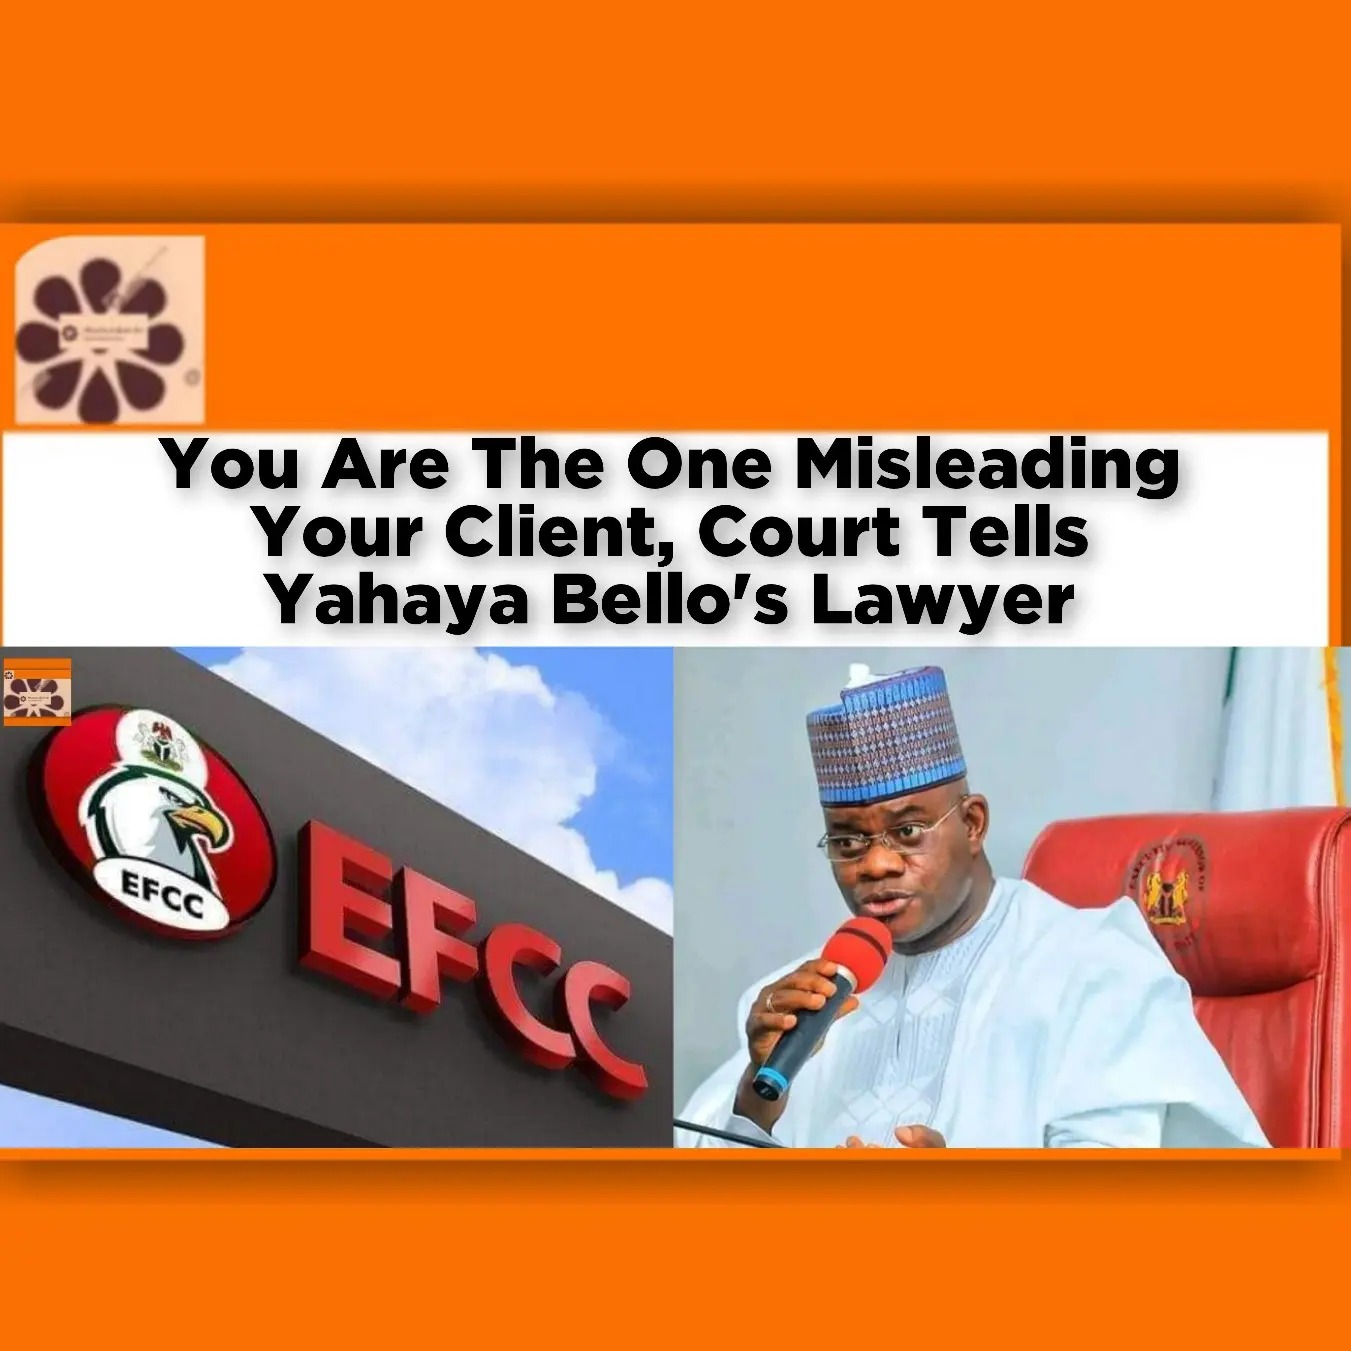 You Are The One Misleading Your Client, Court Tells Yahaya Bello's Lawyer ~ OsazuwaAkonedo #herdsmen